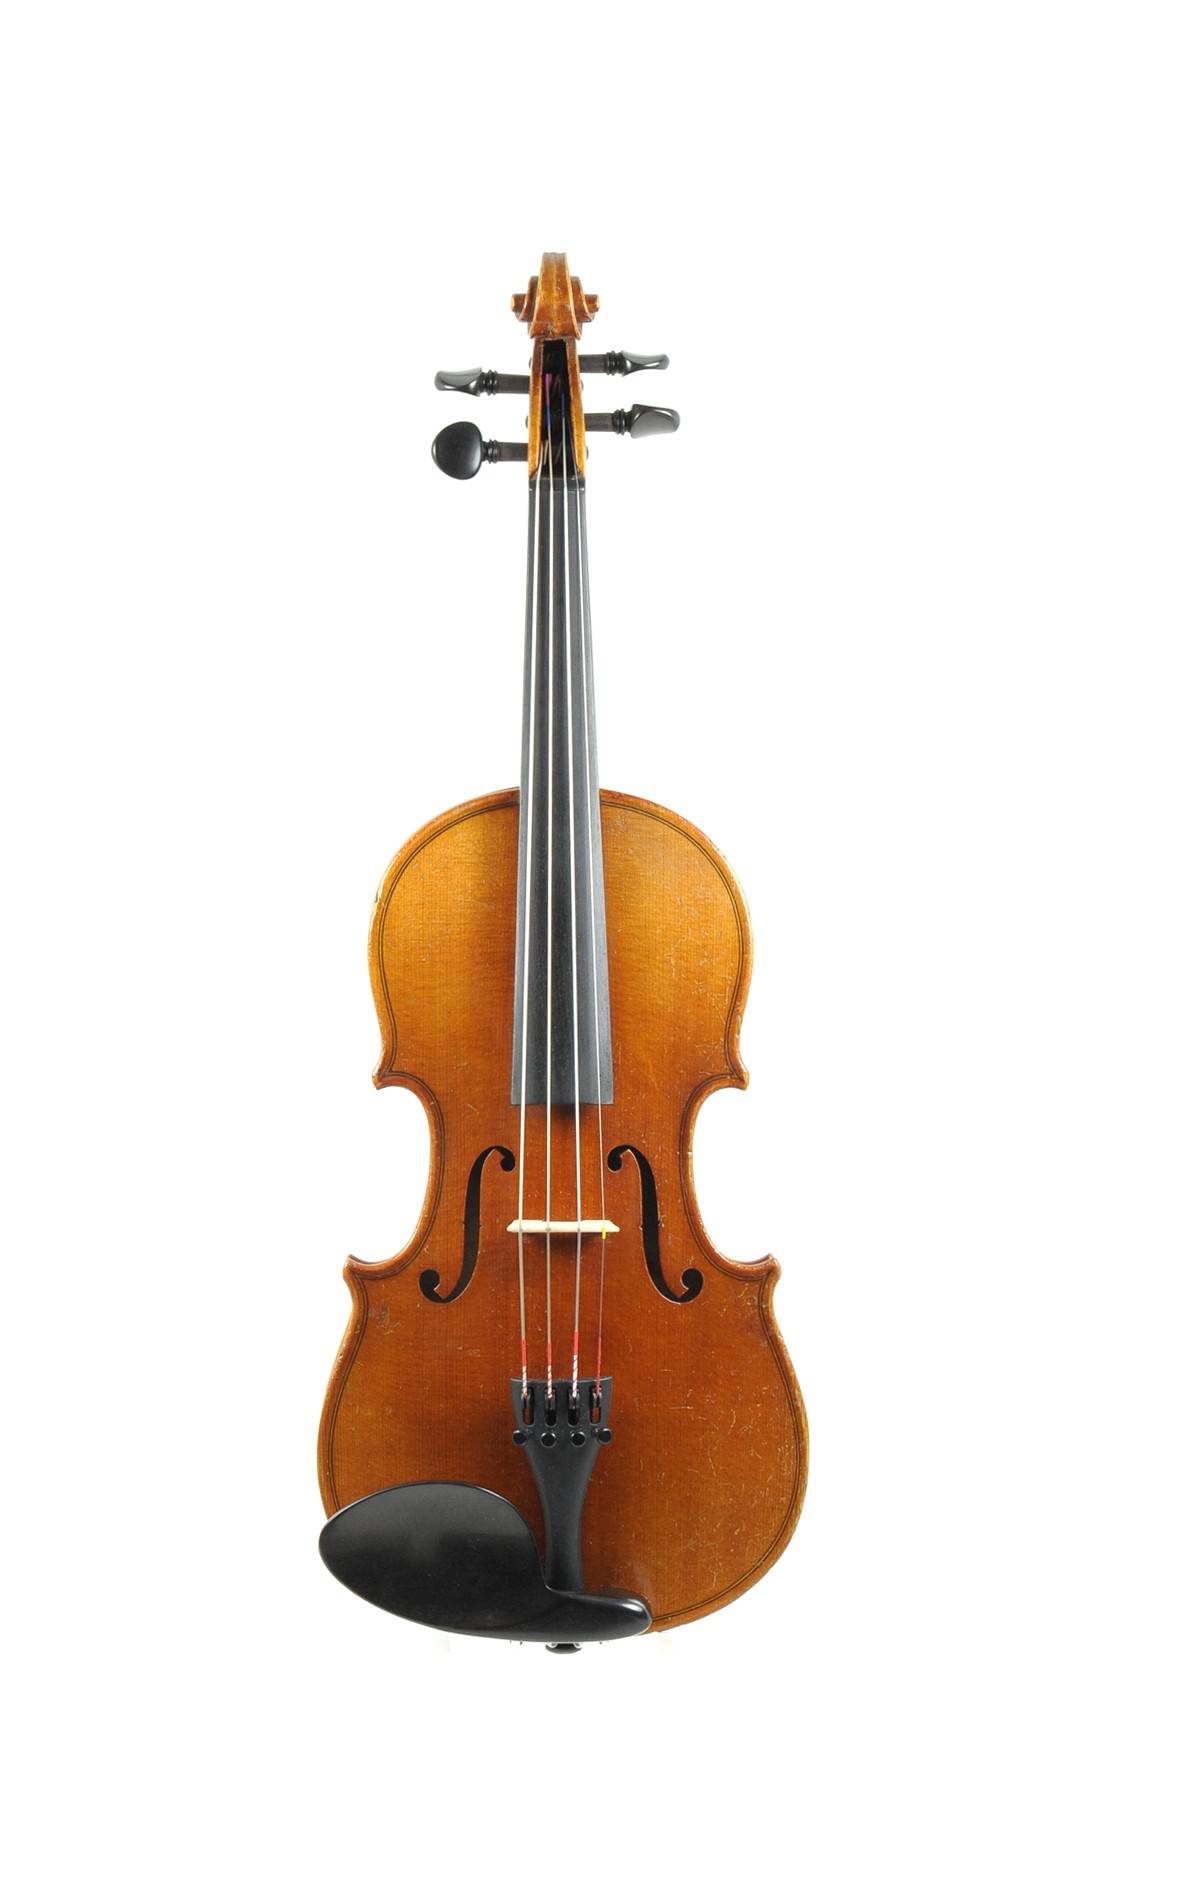 R. Schopper, Leipzig, small violin 1/4 sized, about 1920 - top